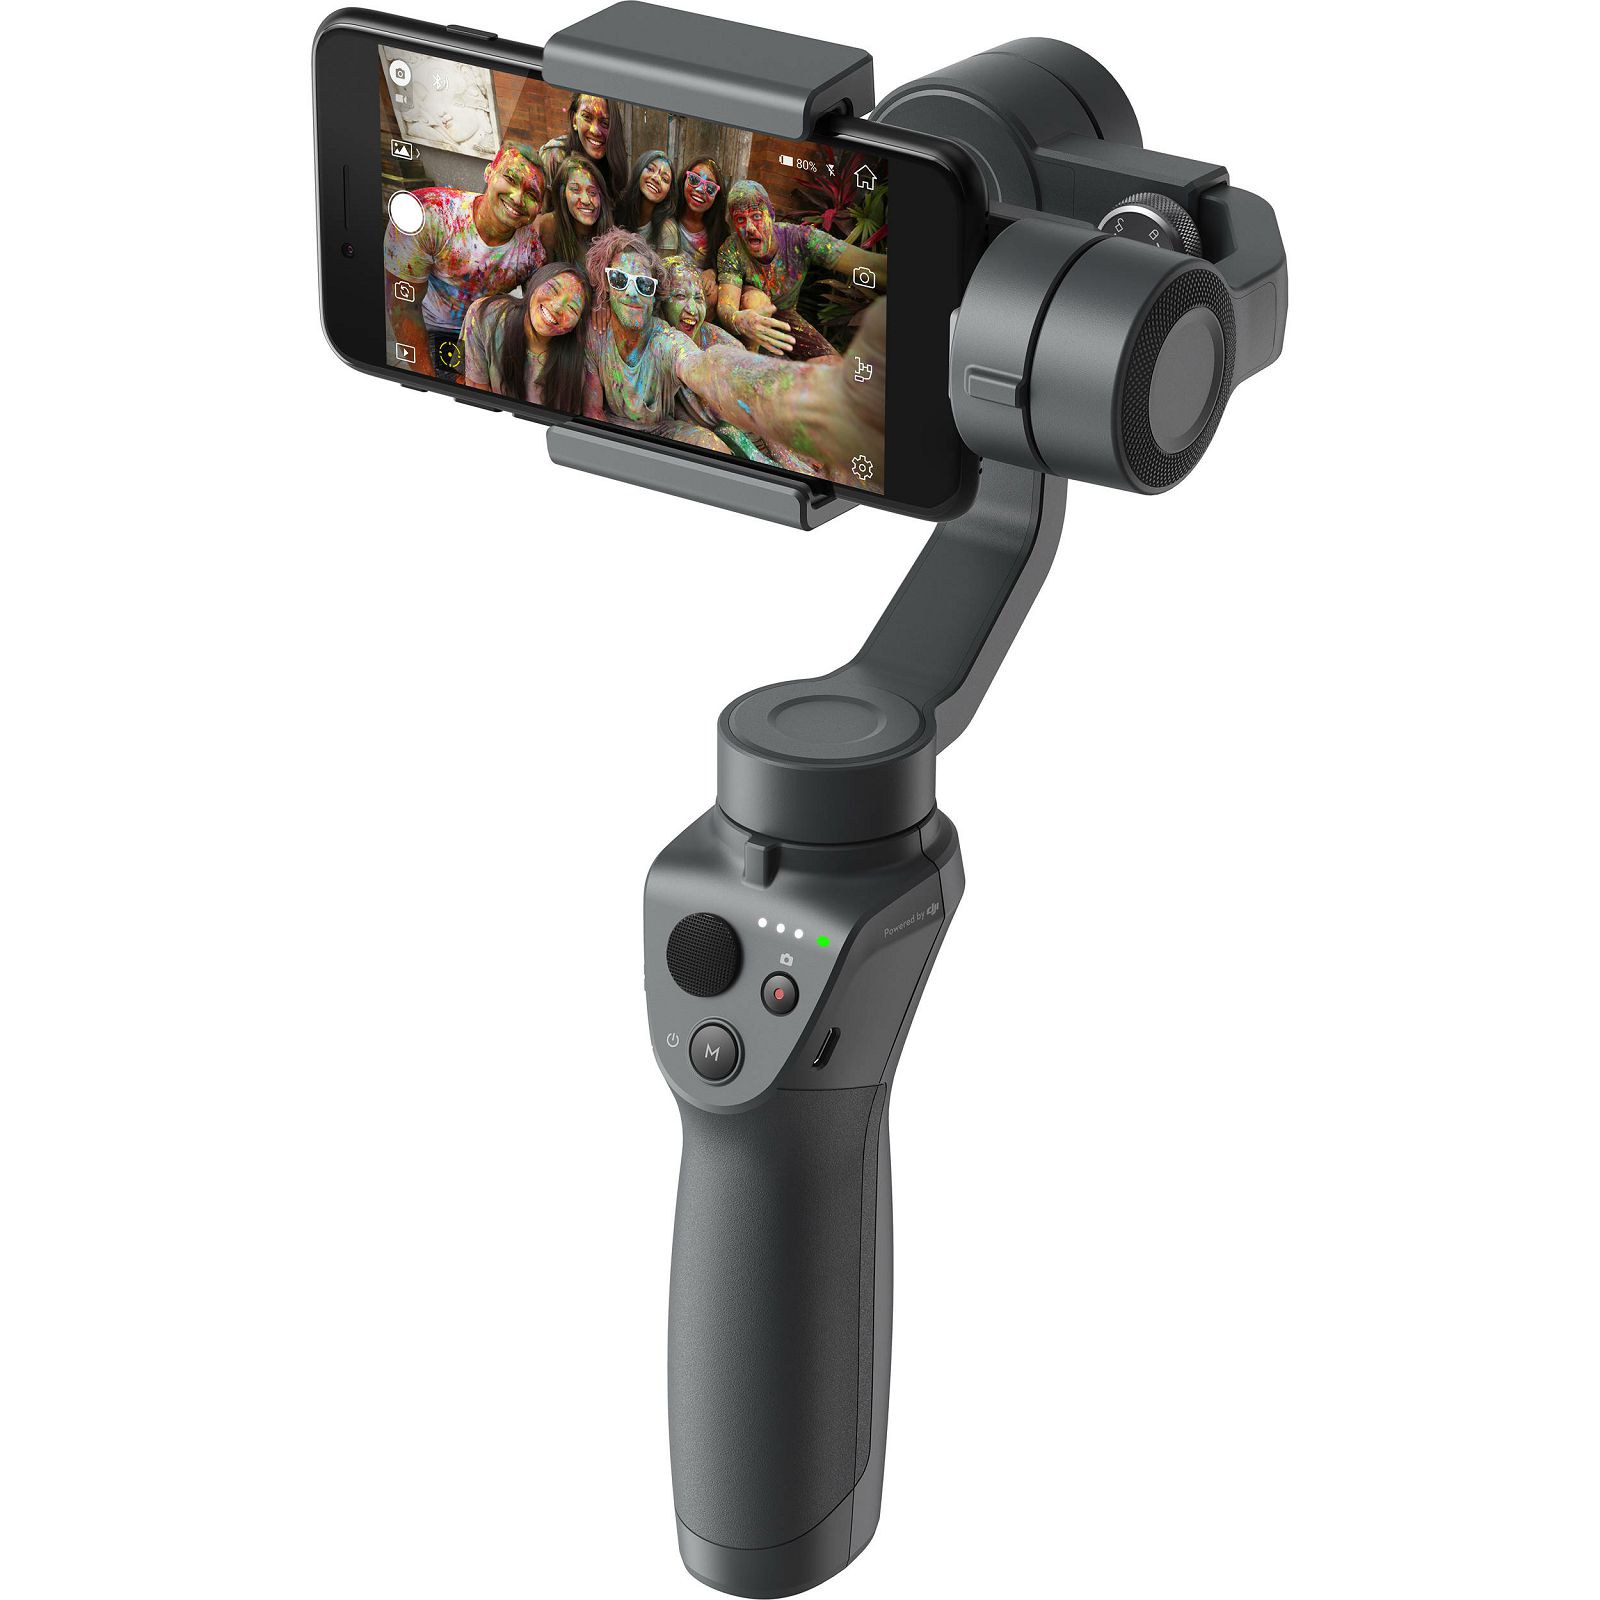 DJI Osmo Mobile 2 3-Axis Gimbal Stabilizer for Smartphones 3D stabilizator za mobitele (CP.ZM.00000064.01)